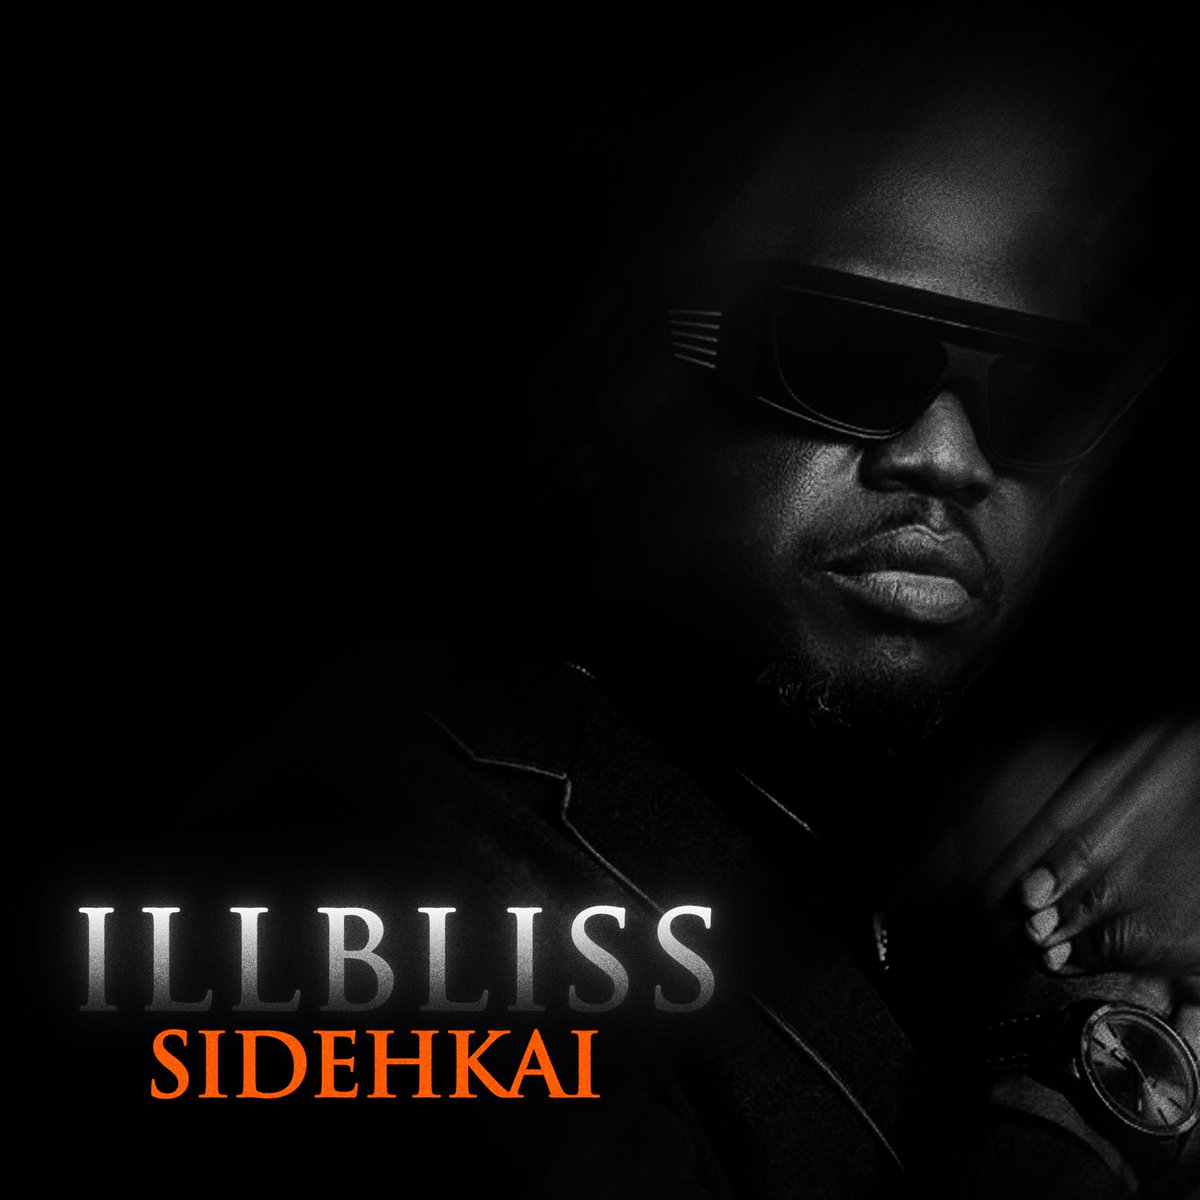 Say something About “SidehKai” . But before you do, I would like to say…. “God Bless You Super Fan” for supporting this incredible Album. Let’s go!!!! #OgaBoss #SidehKai #illBliss